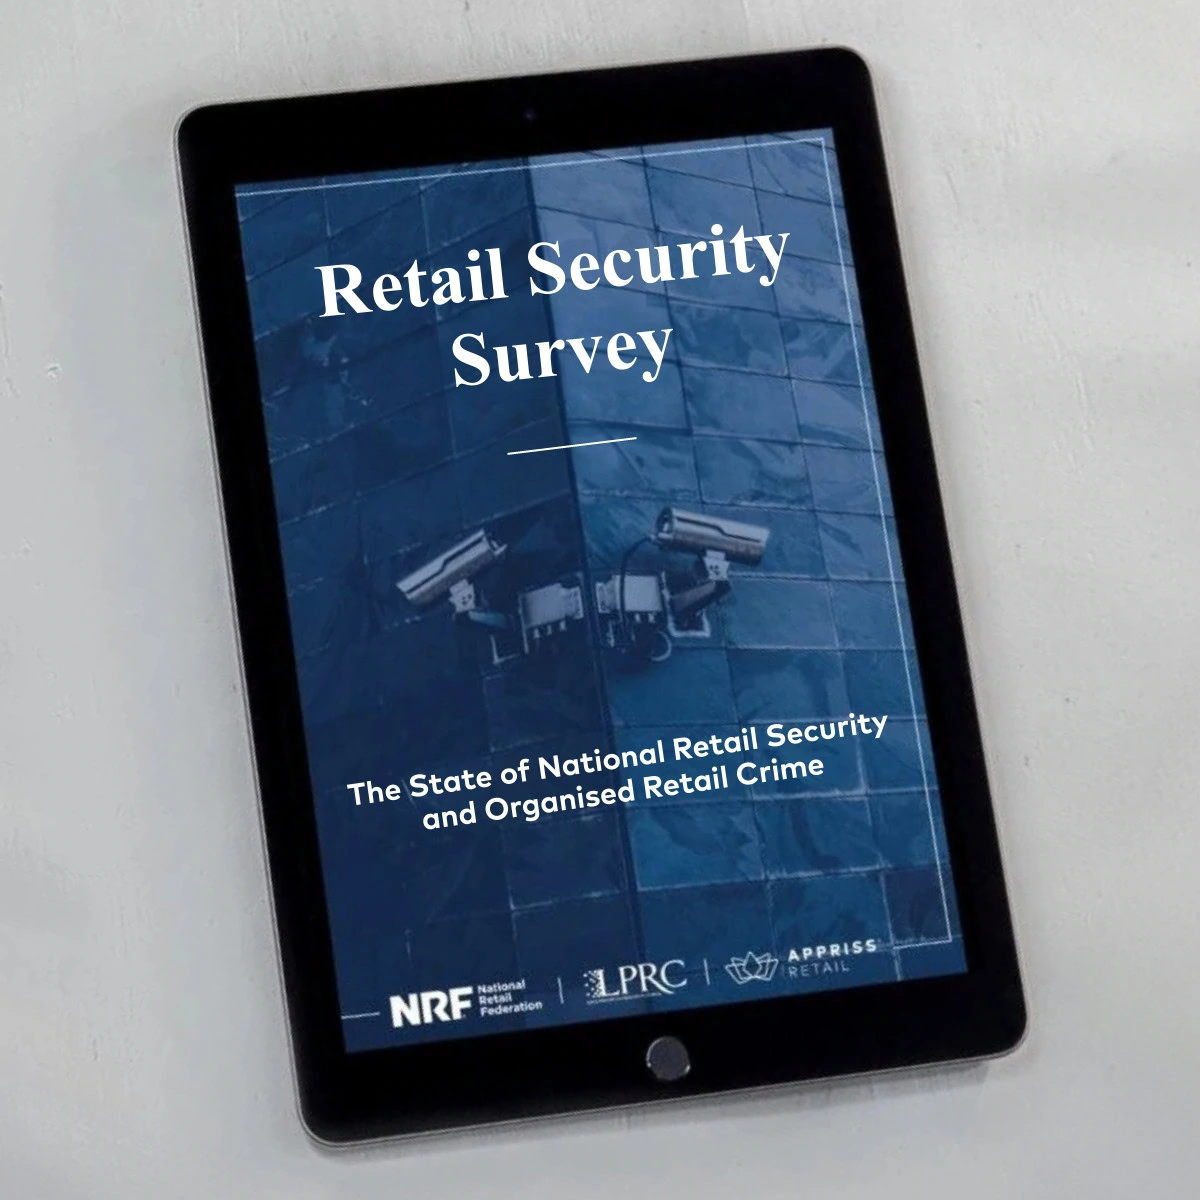 The 2023 National Retail Security Survey report in partnership with Appriss Retail and the National Retail Federation is a retail security report that offers essential insights into the state of retail crime, focusing on theft, including organized retail crime (ORC), and explores retailers' loss prevention and asset protection strategies. Discover the latest retail shrinkage percentage in retail in 2023 and loss prevention strategies with the 2023 Retail Security Survey Report including impact of ORC.